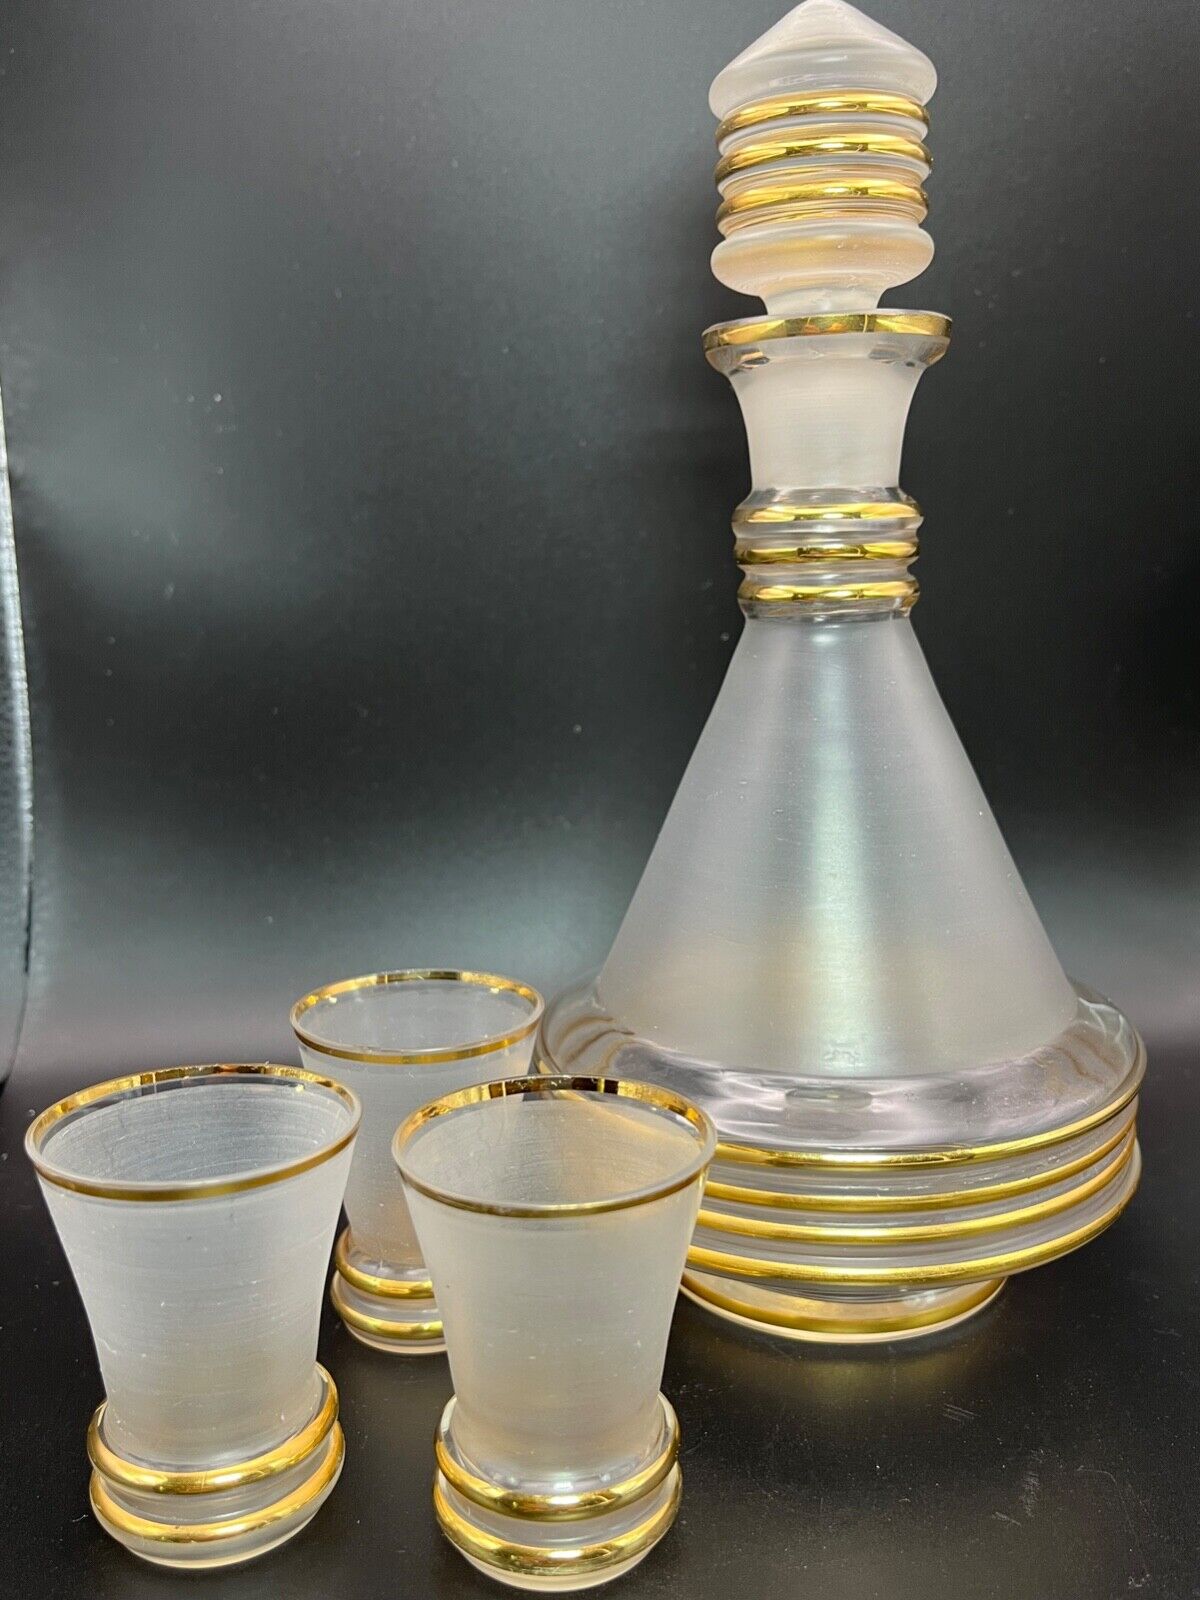 Vintage Art Deco Frosted Decanter With Gold Bands And 3 Glasses MCM- RARE Find